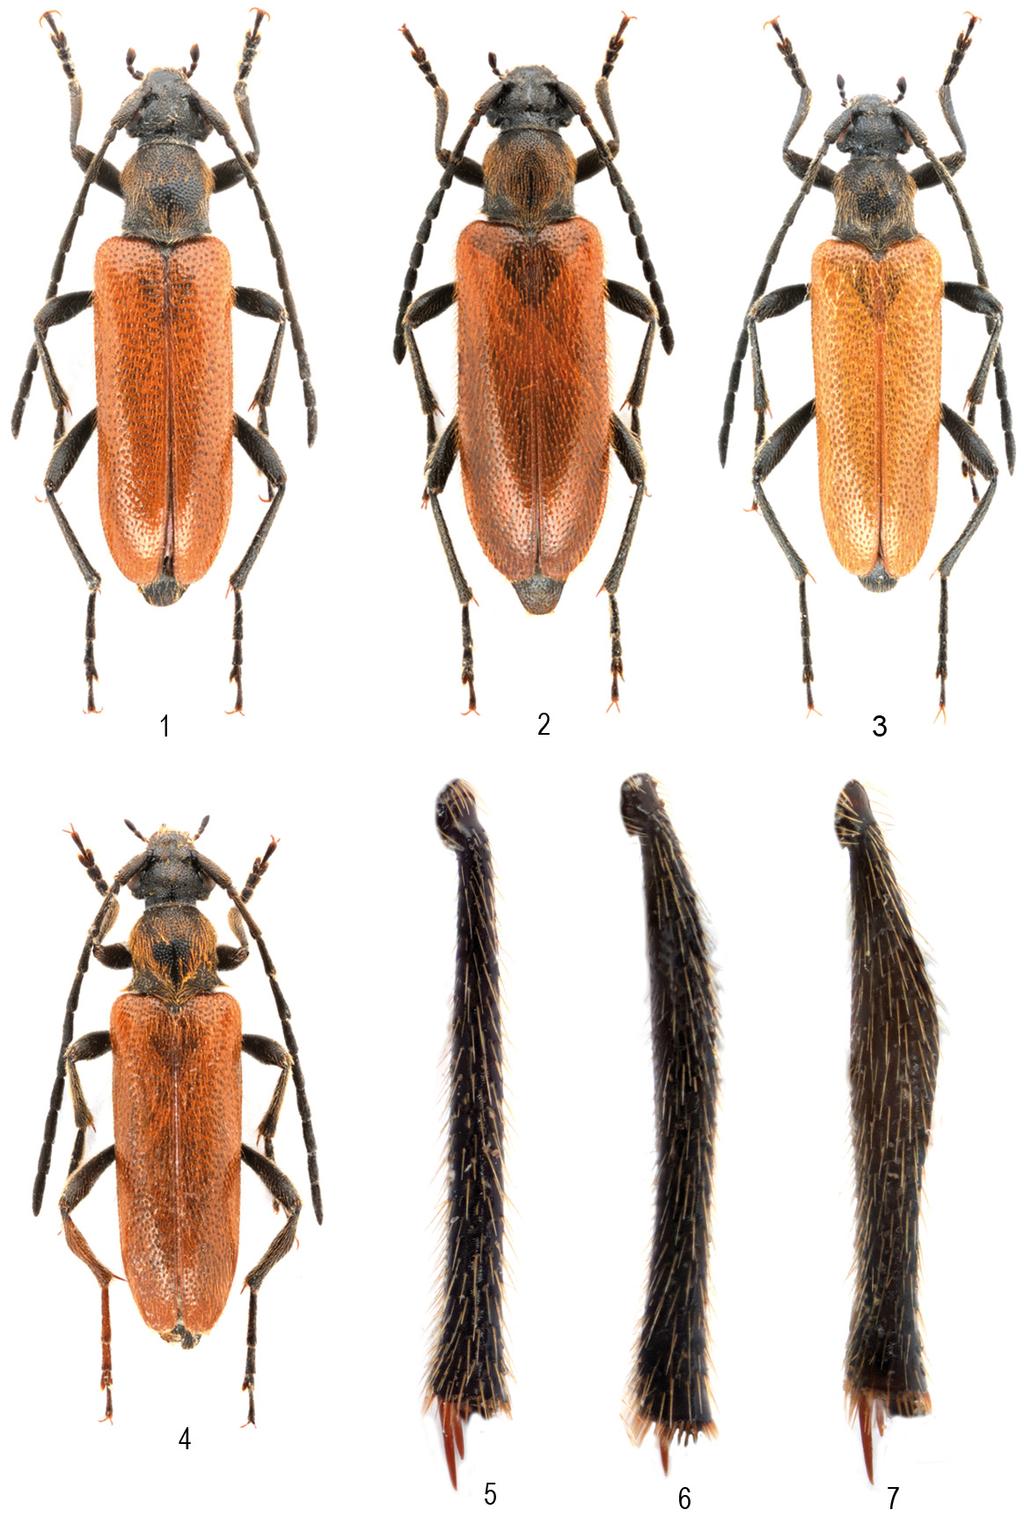 A new Alosterna and other Cerambycidae from Lebanon 25 Figs 1 4. Alosterna species, dorsal view: 1 = A. libani sp. n., holotype, male, 2 = A. libani sp. n., paratype, female, 3 = A.